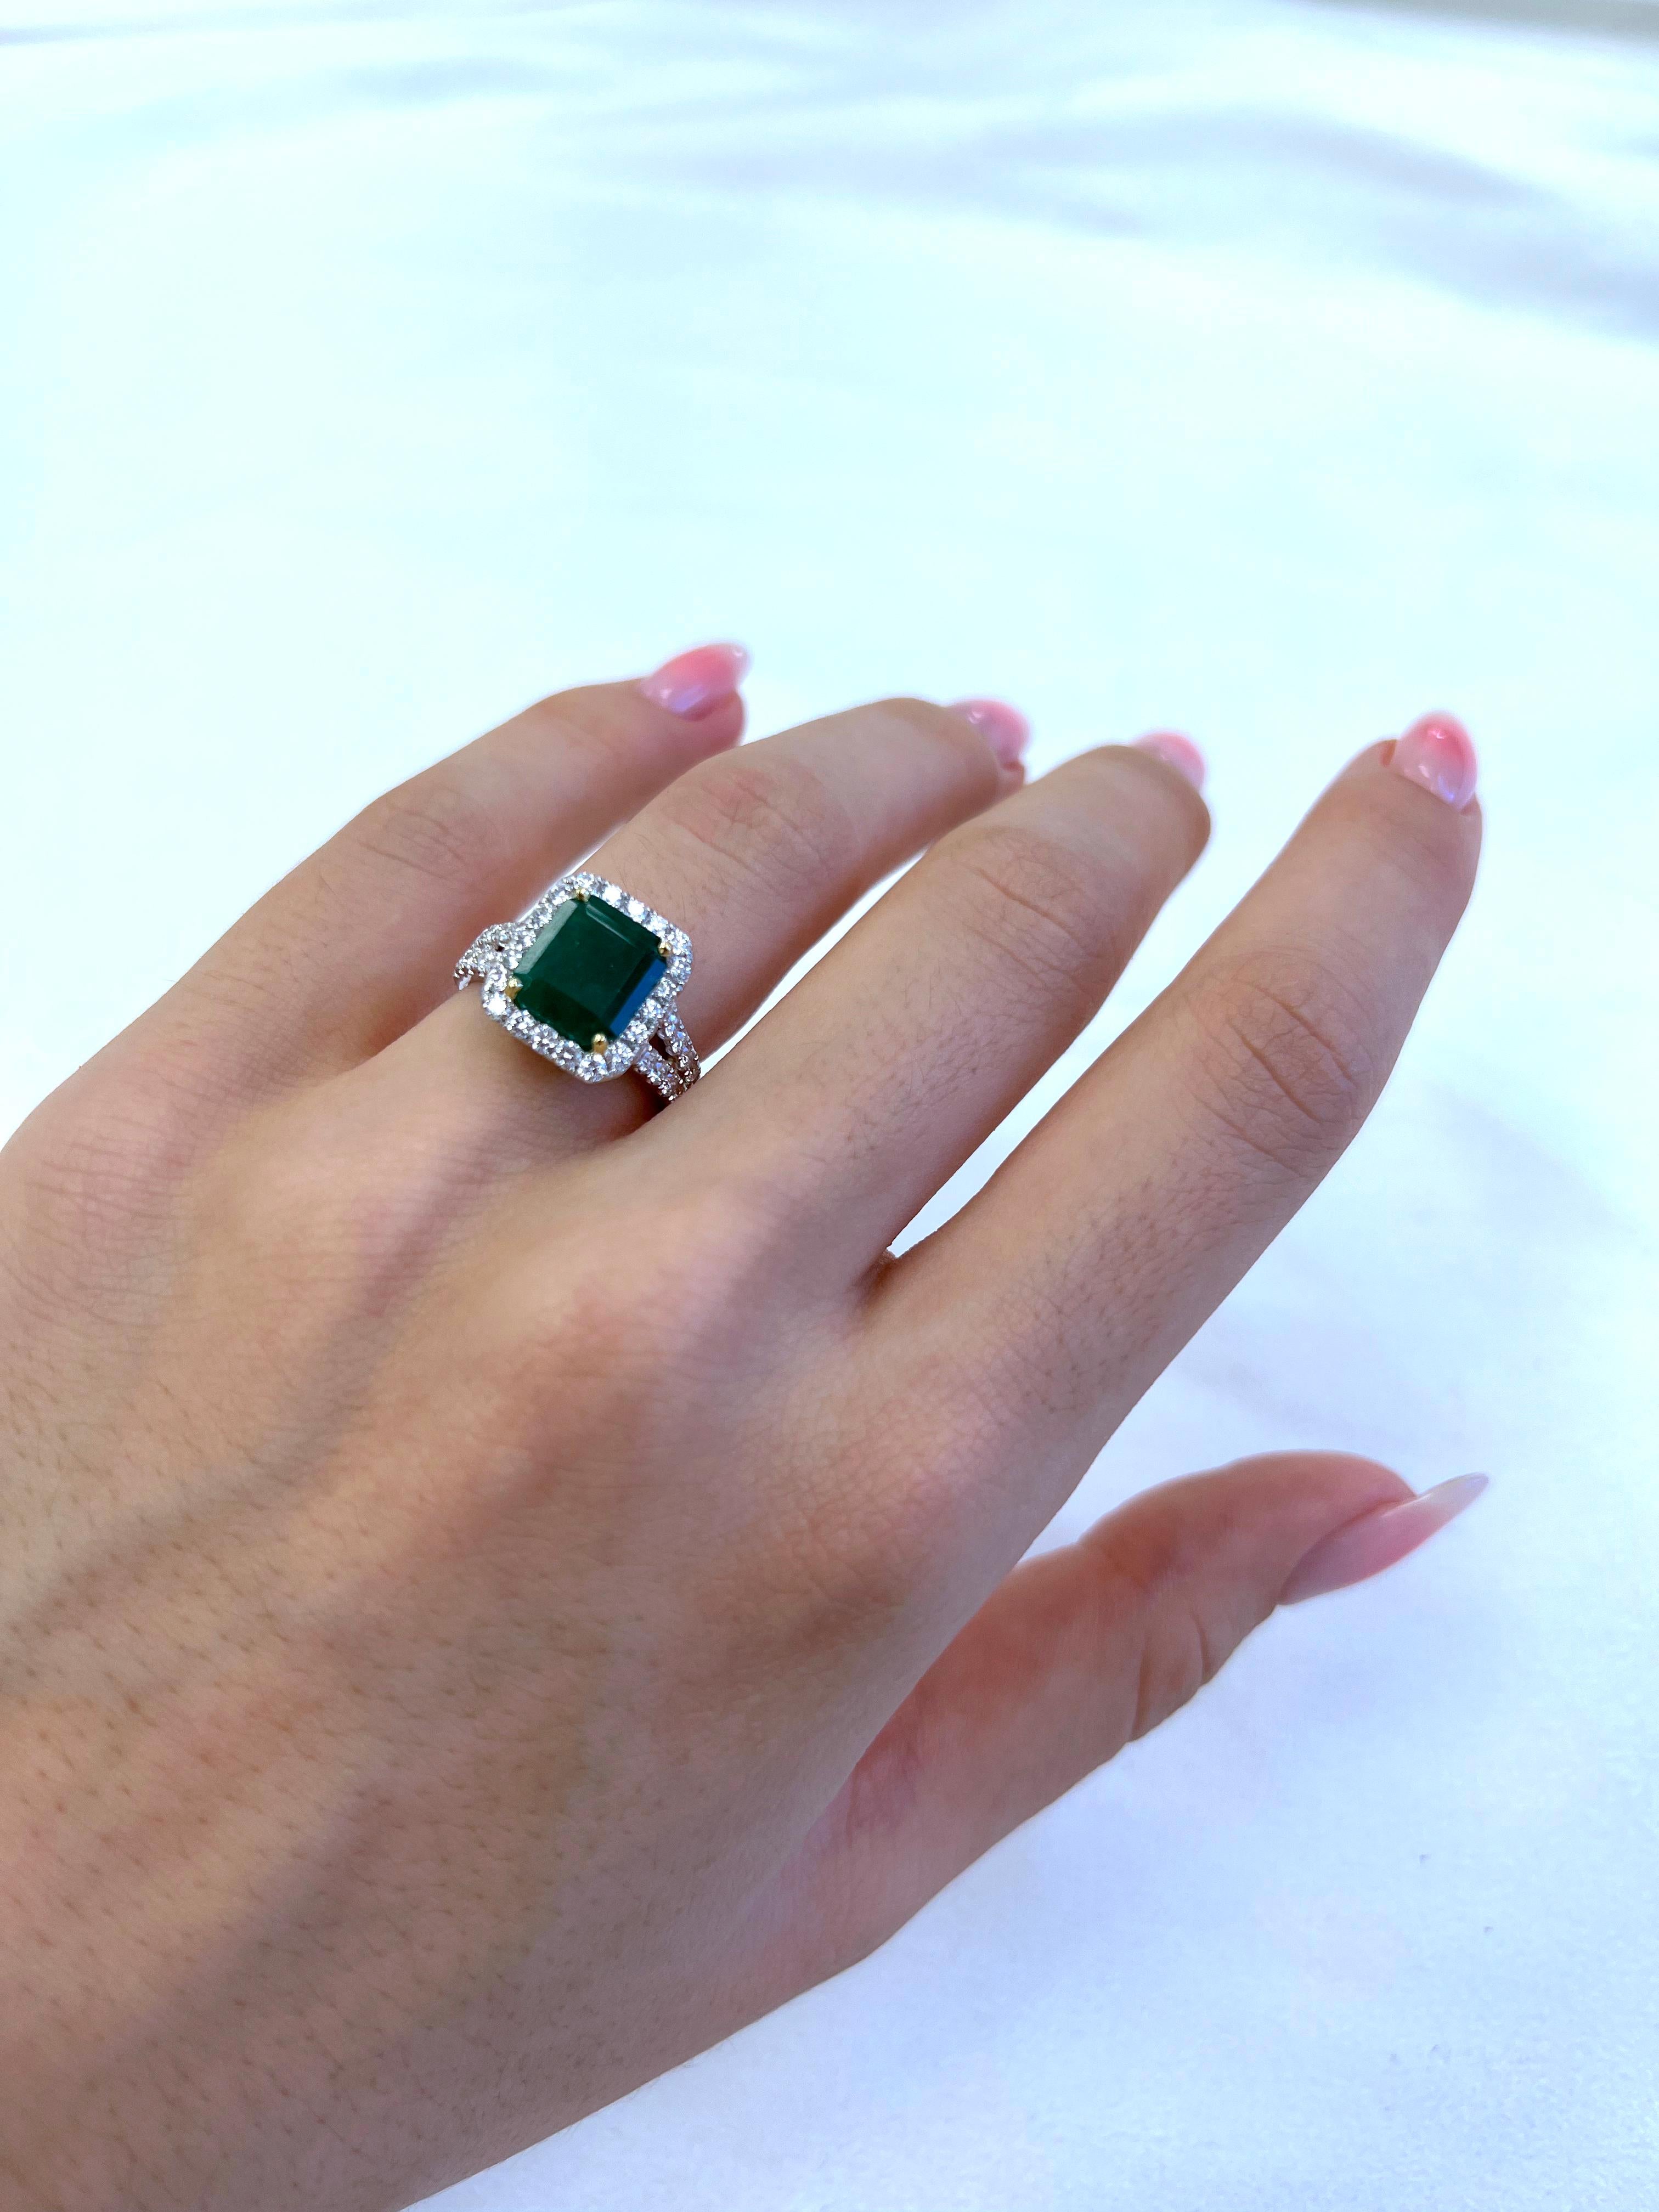 Classic emerald and diamond halo ring, GIA certified. 
4.15 carats total gemstone weight.
2.86 carat emerald cut emerald, F3, GIA certified. Complimented by 44 round brilliant diamonds, 1.23 carats, F/G color and VS clarity. 18k white and yellow